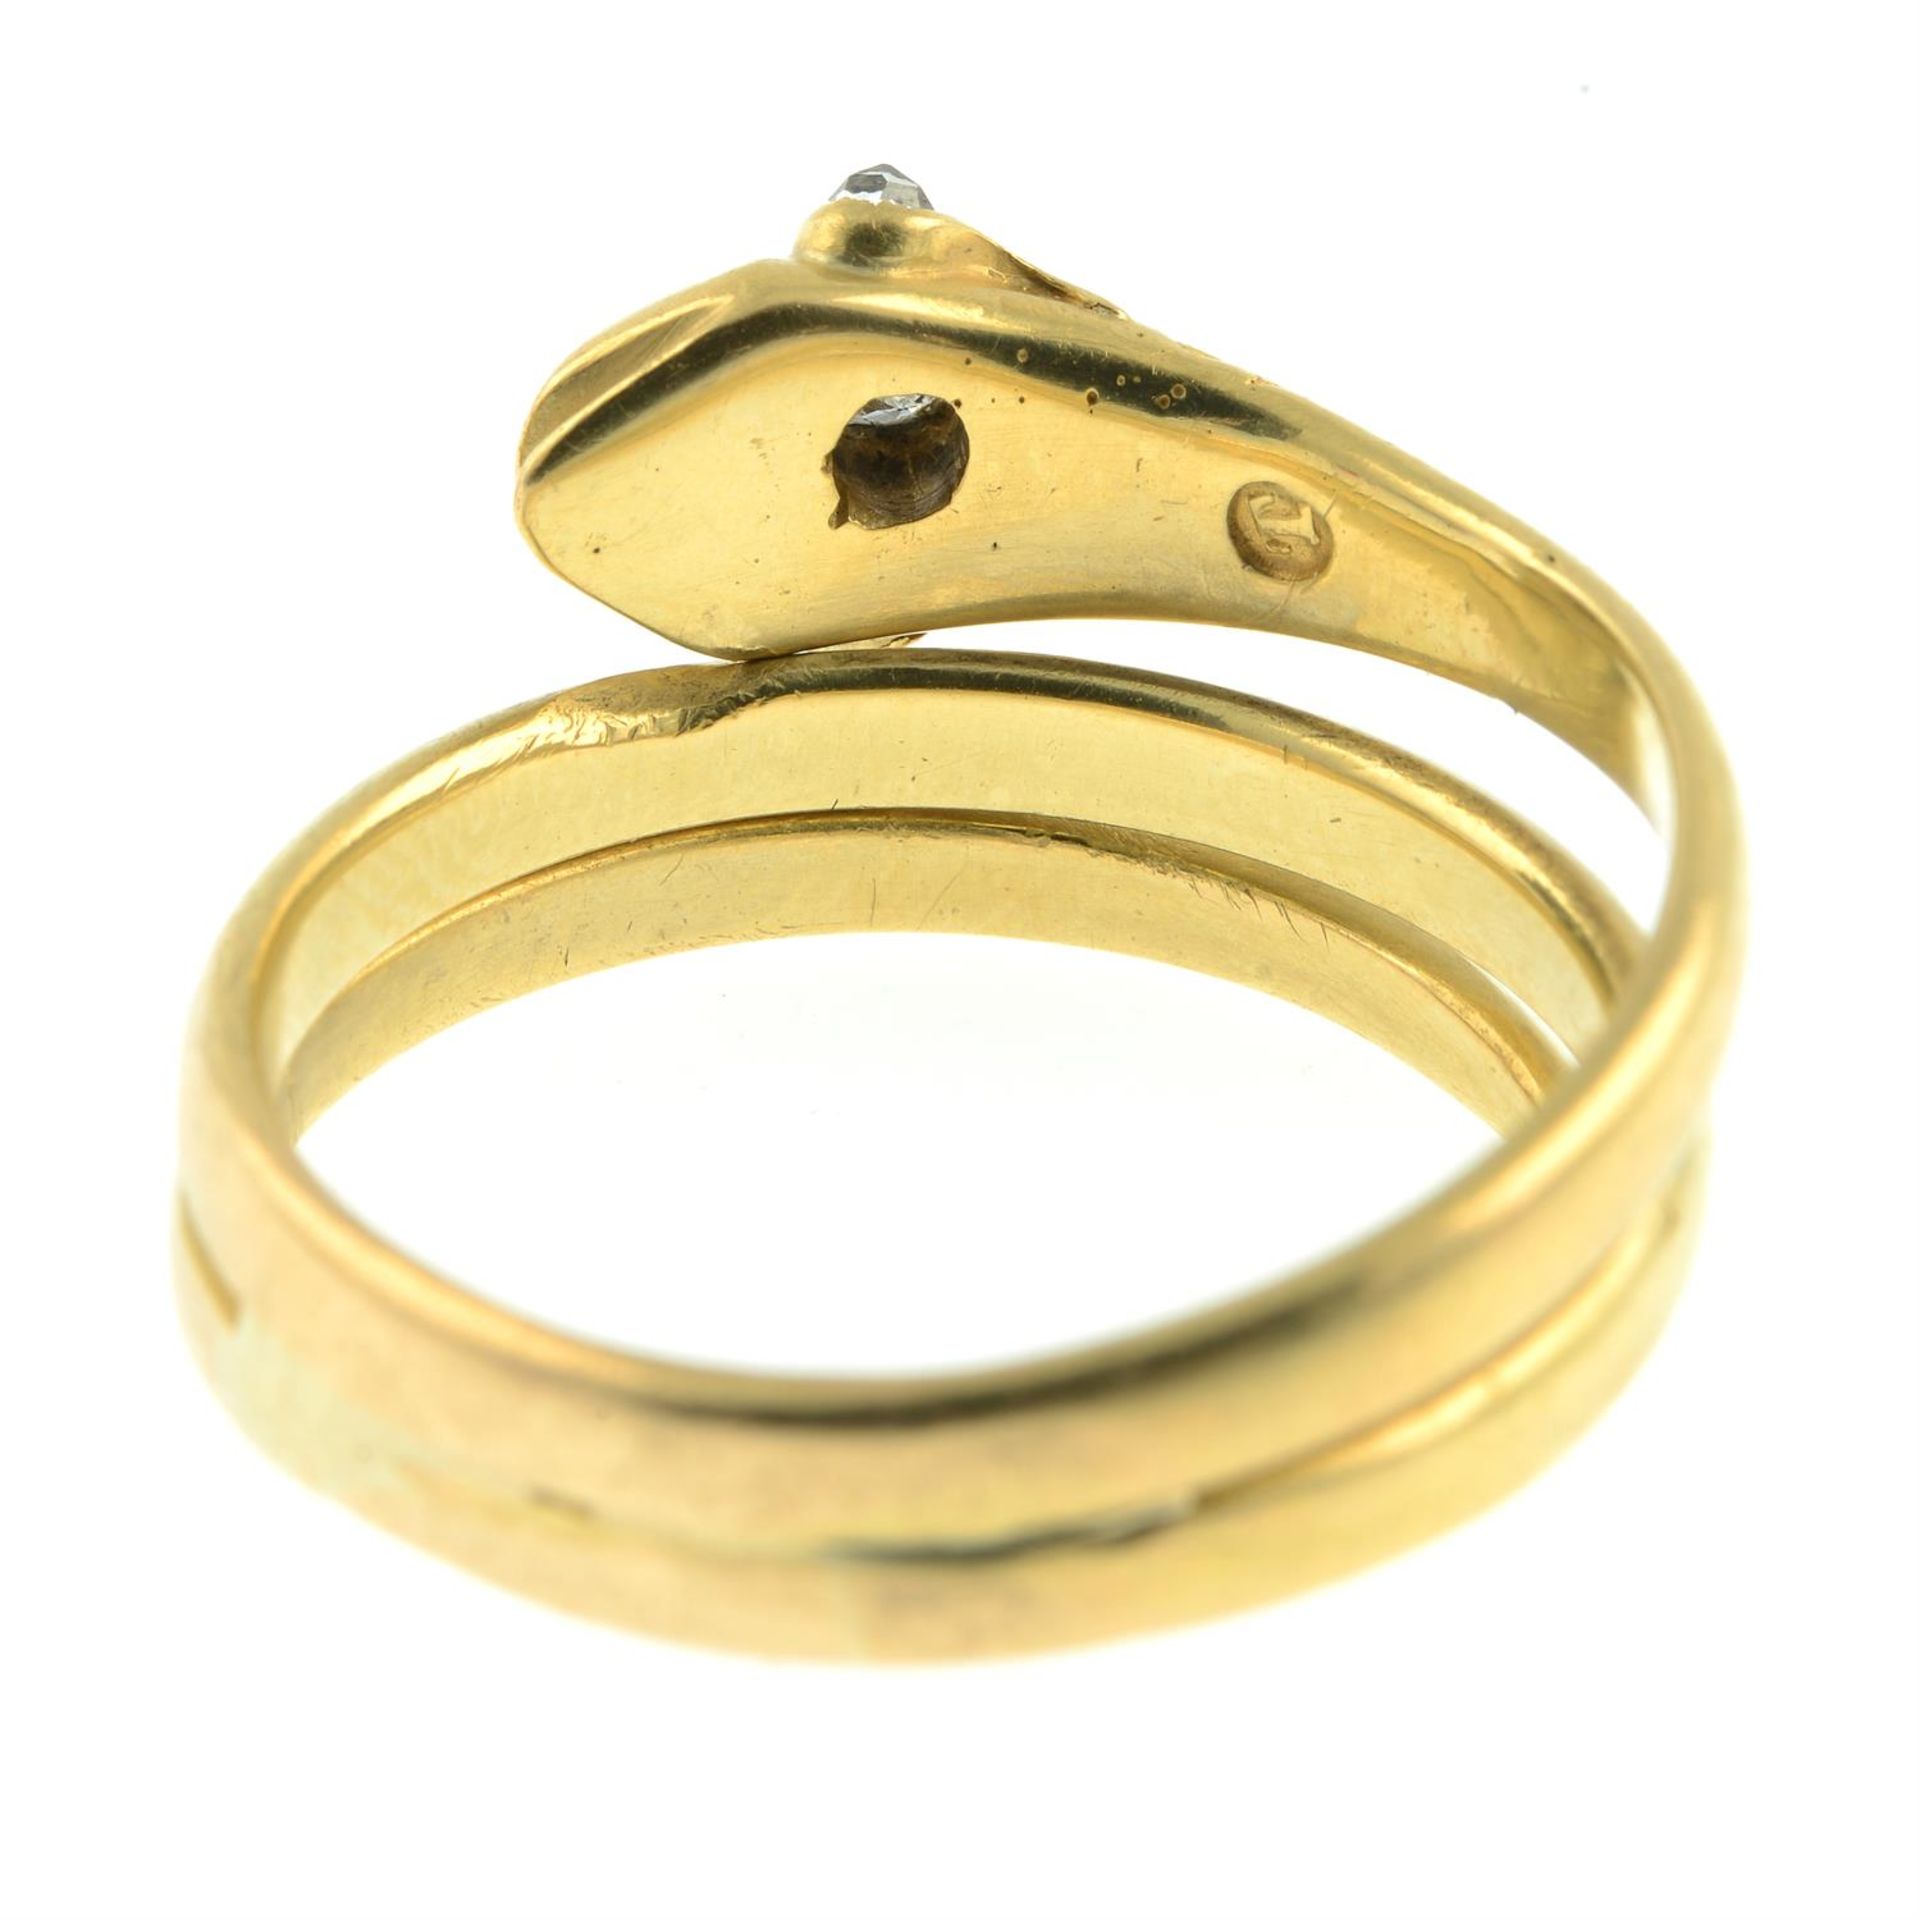 A mid Victorian 18ct gold snake ring, with diamond crest and eyes. - Image 4 of 5